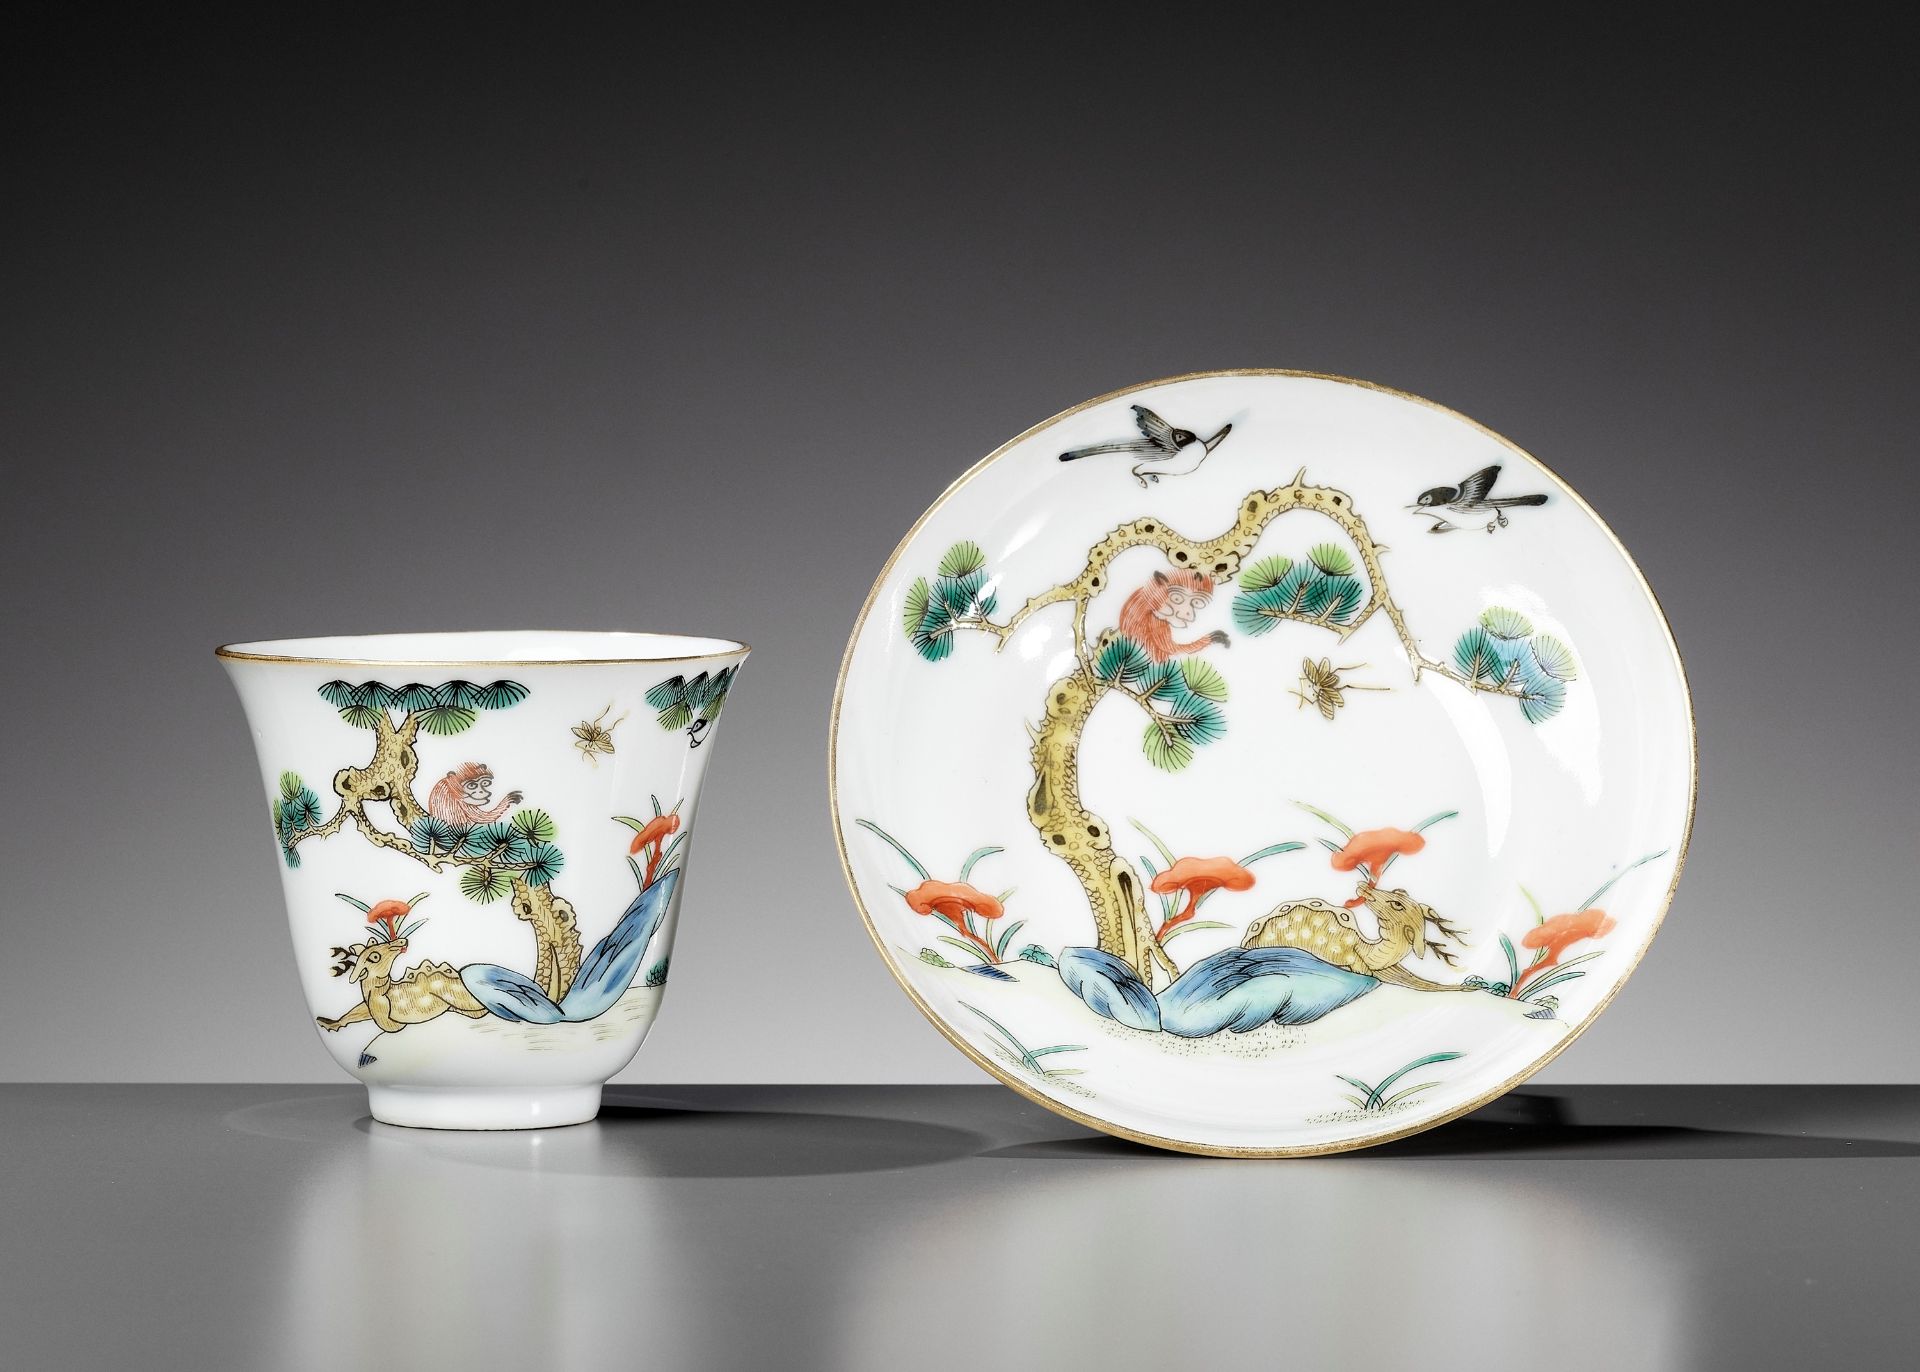 AN AUSPICIOUS 'MONKEY AND DEER' CUP AND SAUCER, XIANFENG MARK AND PERIOD